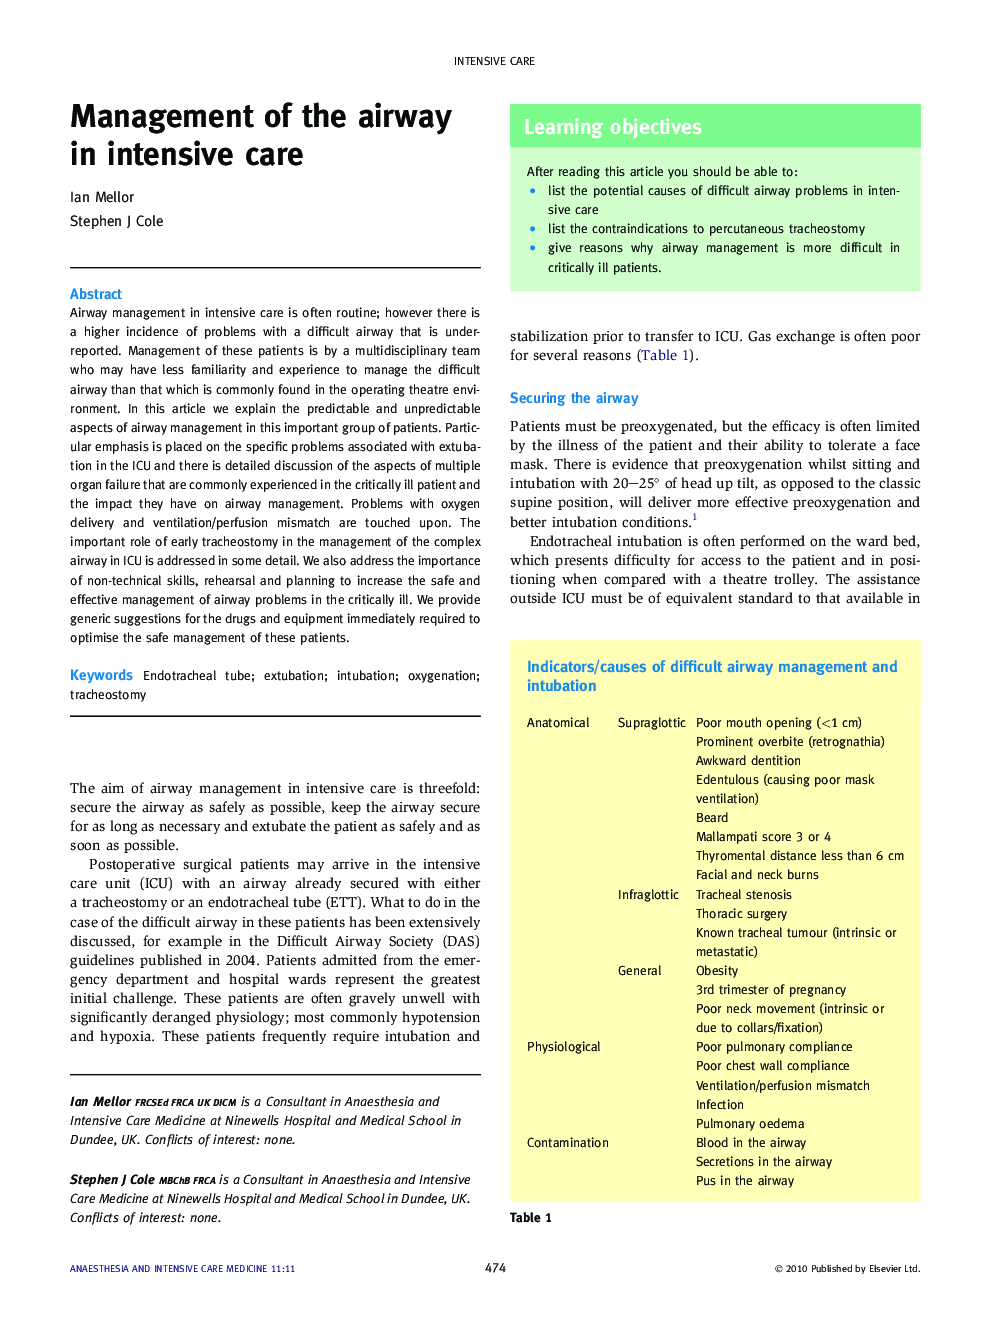 Management of the airway in intensive care